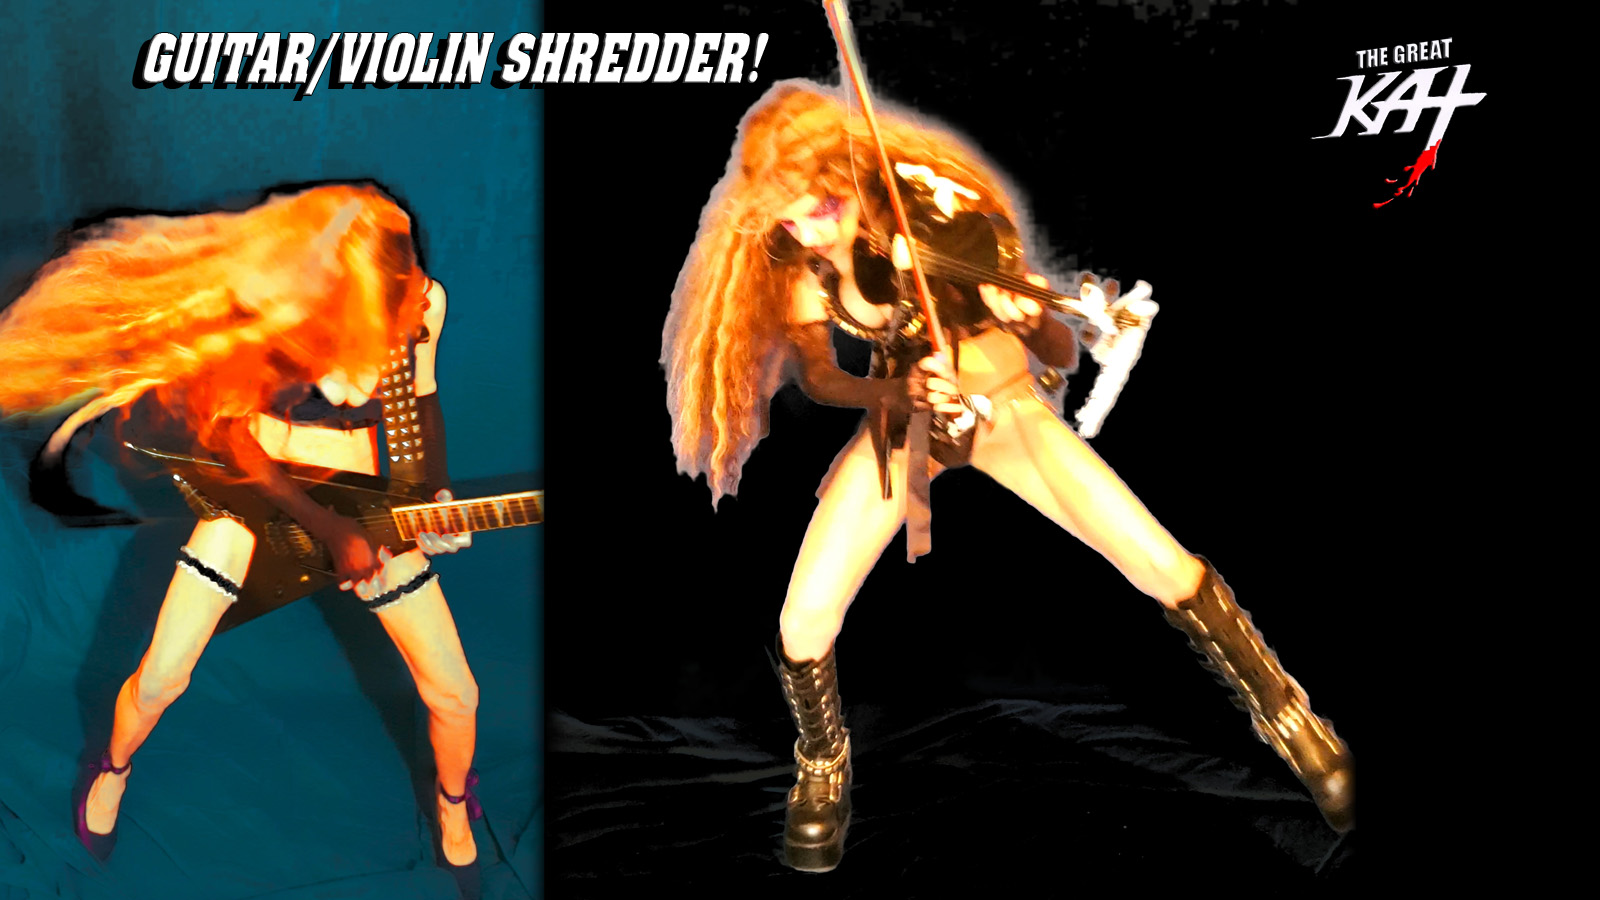 GUITAR/VIOLIN SHREDDER! MOZART'S THE MARRIAGE OF FIGARO OVERTURE by THE GREAT KAT!